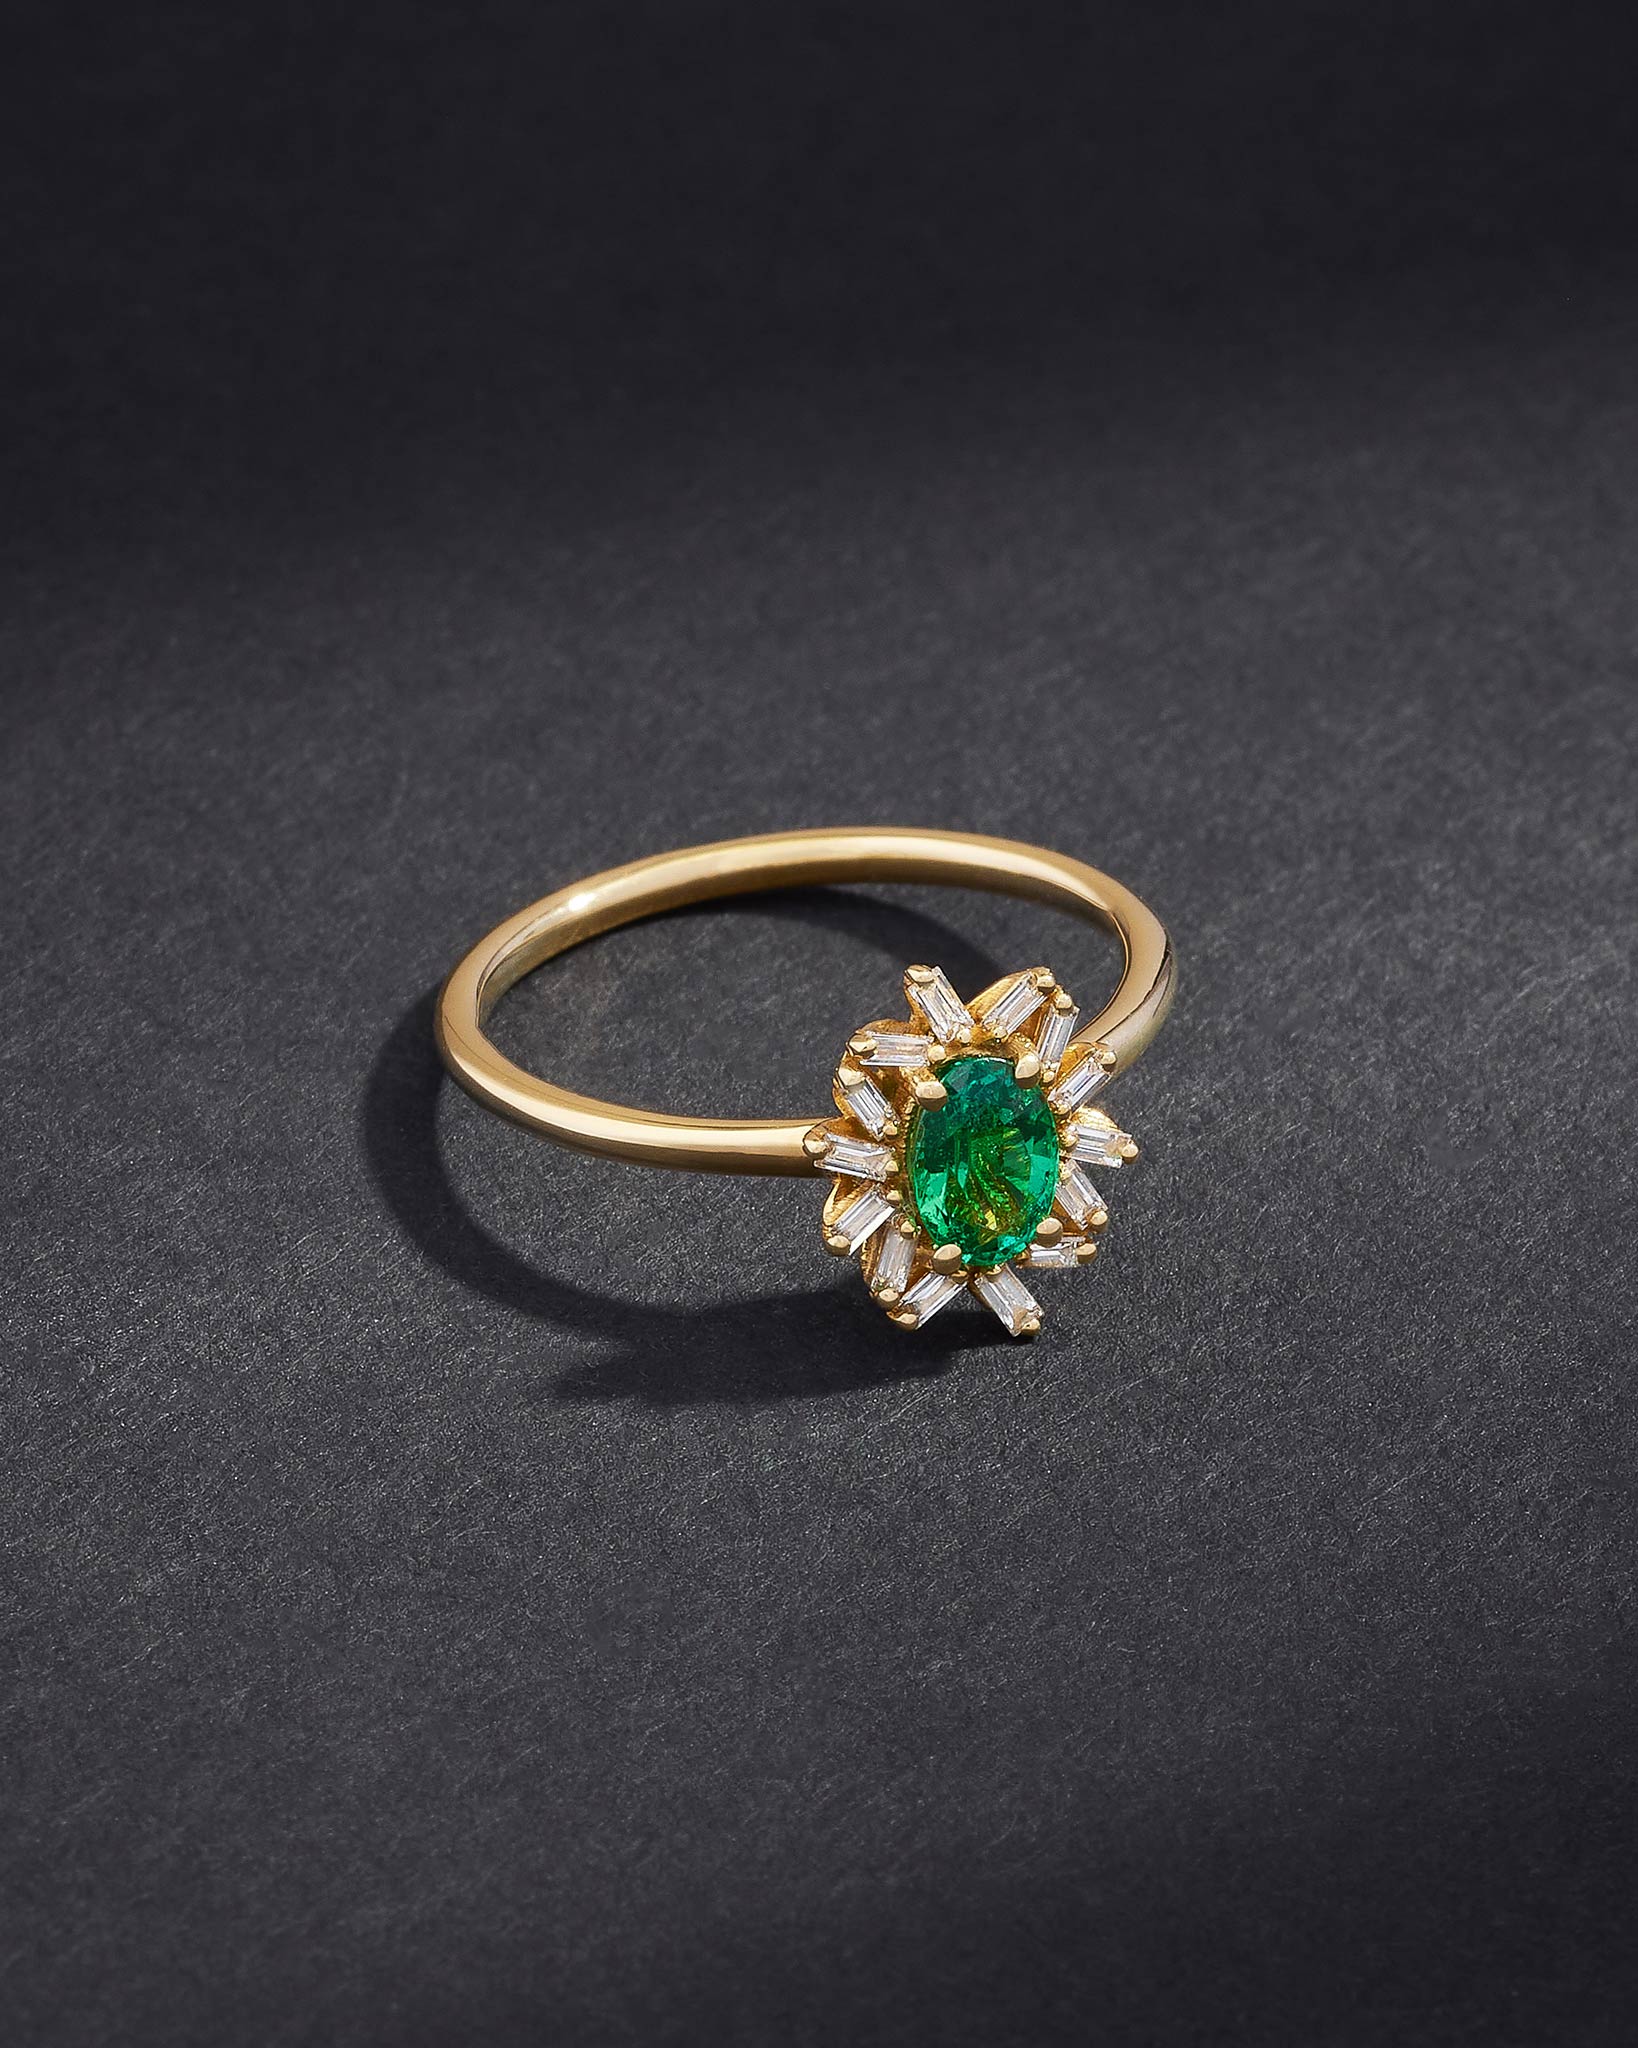 Suzanne Kalan One of a Kind Oval Cut Emerald Fireworks Ring in 18k yellow gold